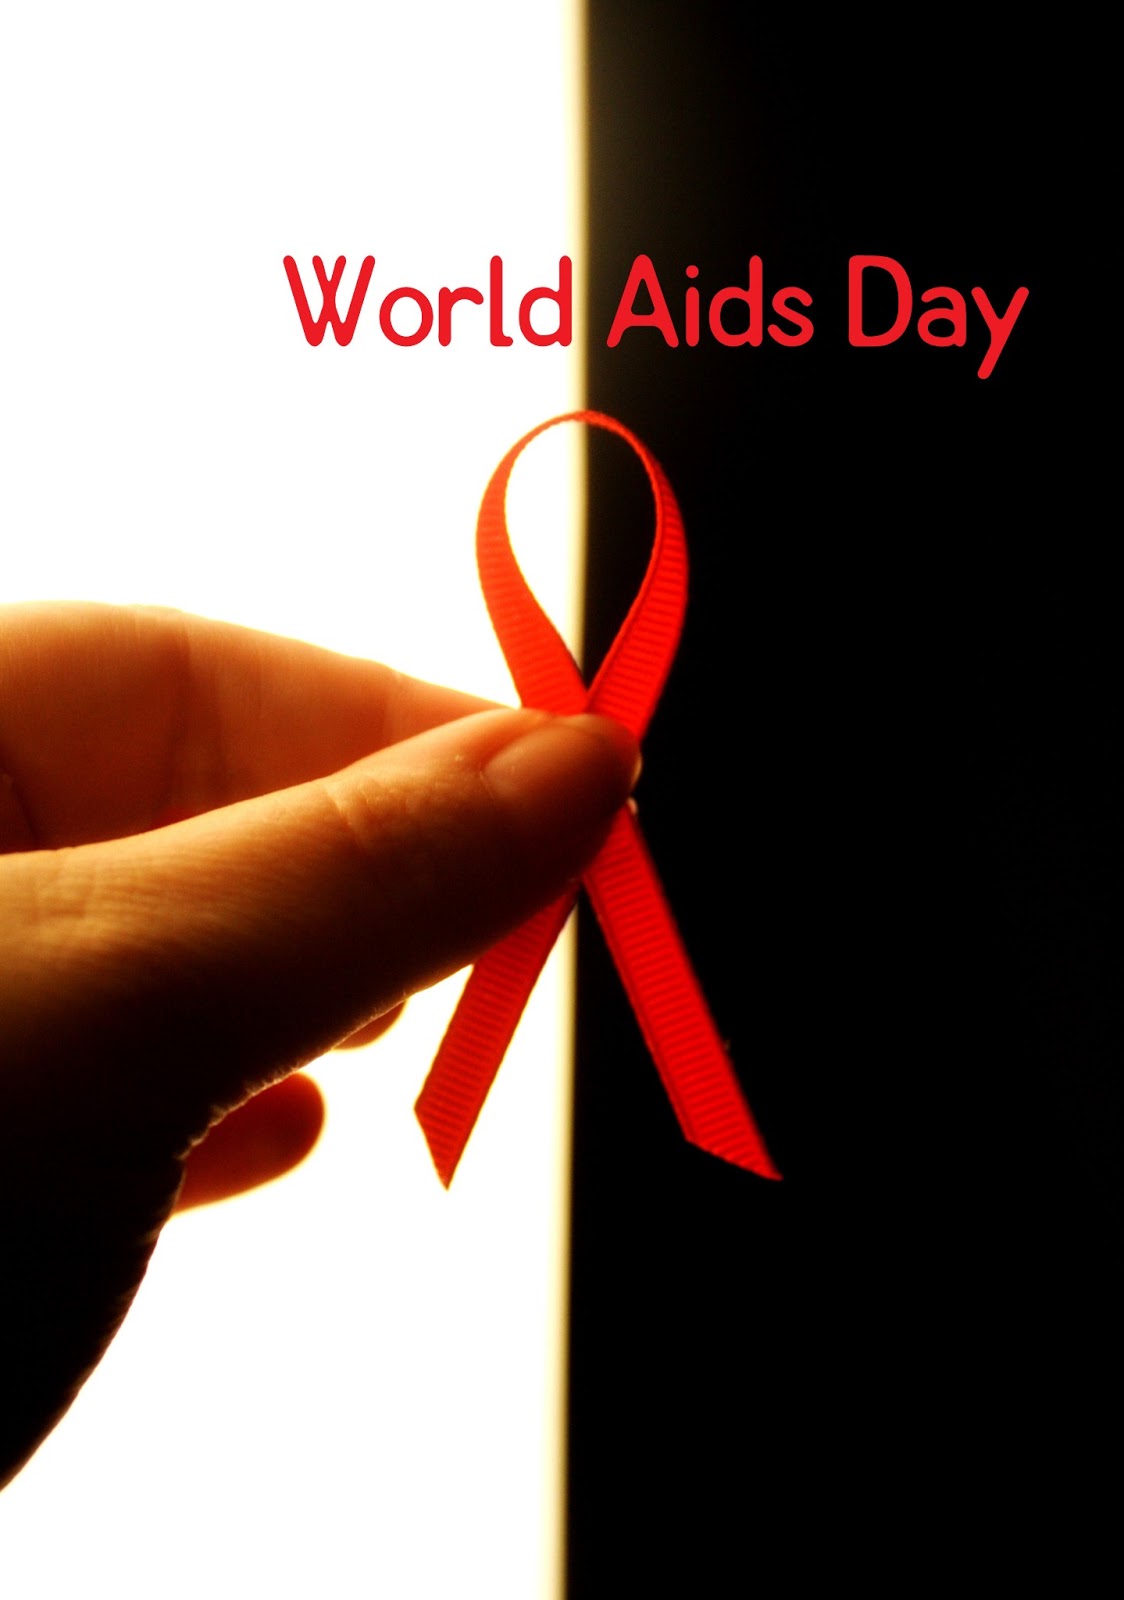 World Aids Day Ribbon In Hand